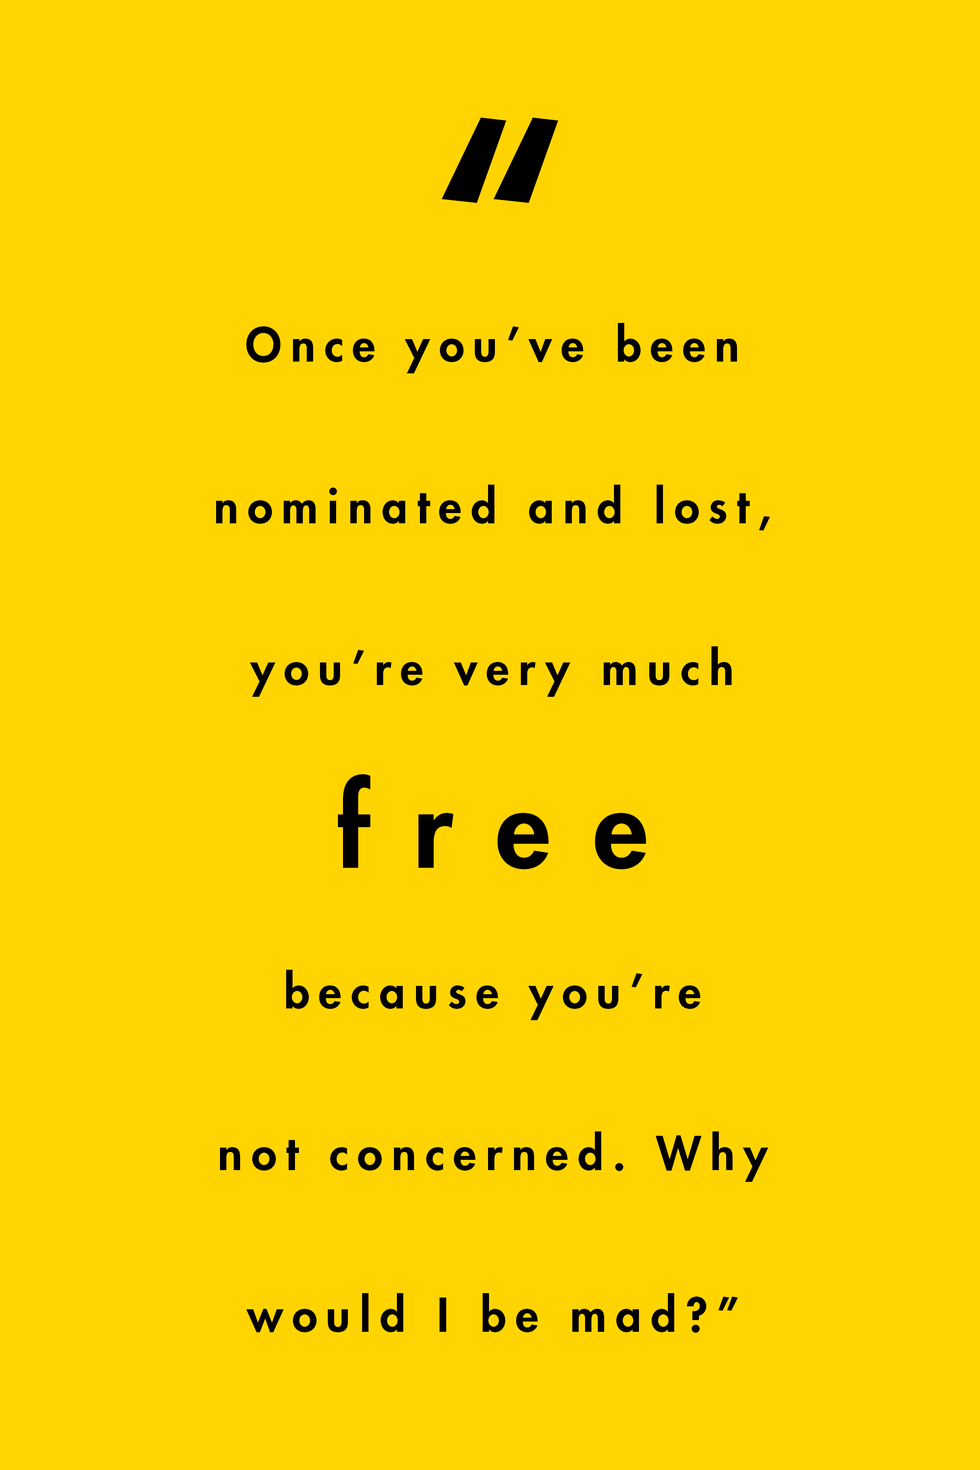 black text on yellow background reads "once you’ve been nominated and lost, you’re very much free because you’re not concerned why would i be mad"